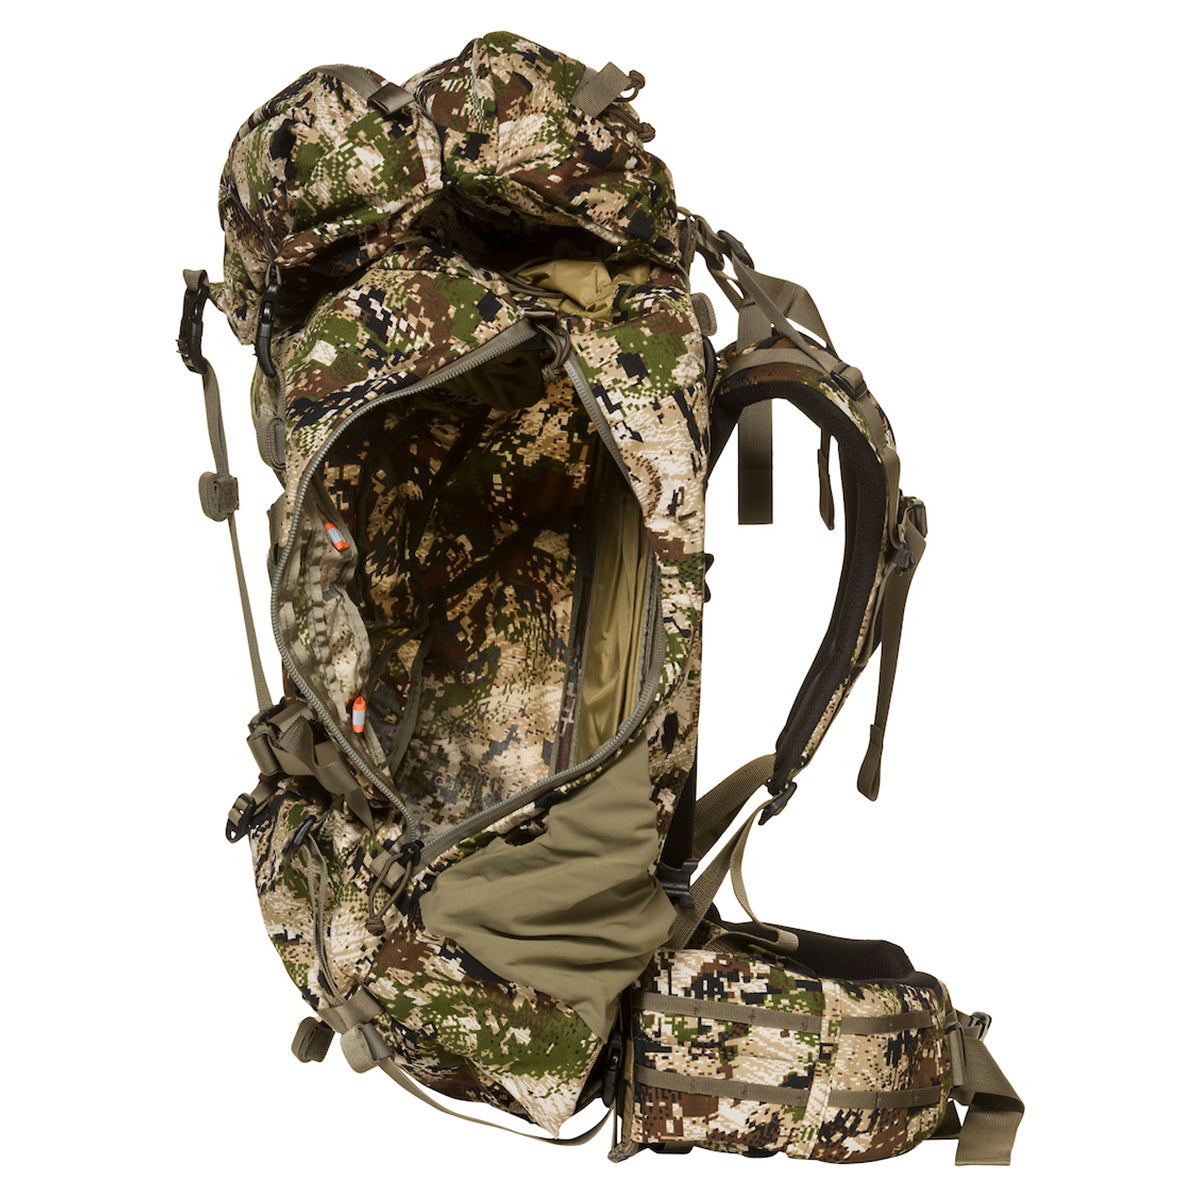 Mystery Ranch Women's Metcalf Backpack in Mystery Ranch Women's Metcalf Backpack (2020) by Mystery Ranch | Gear - goHUNT Shop by GOHUNT | Mystery Ranch - GOHUNT Shop